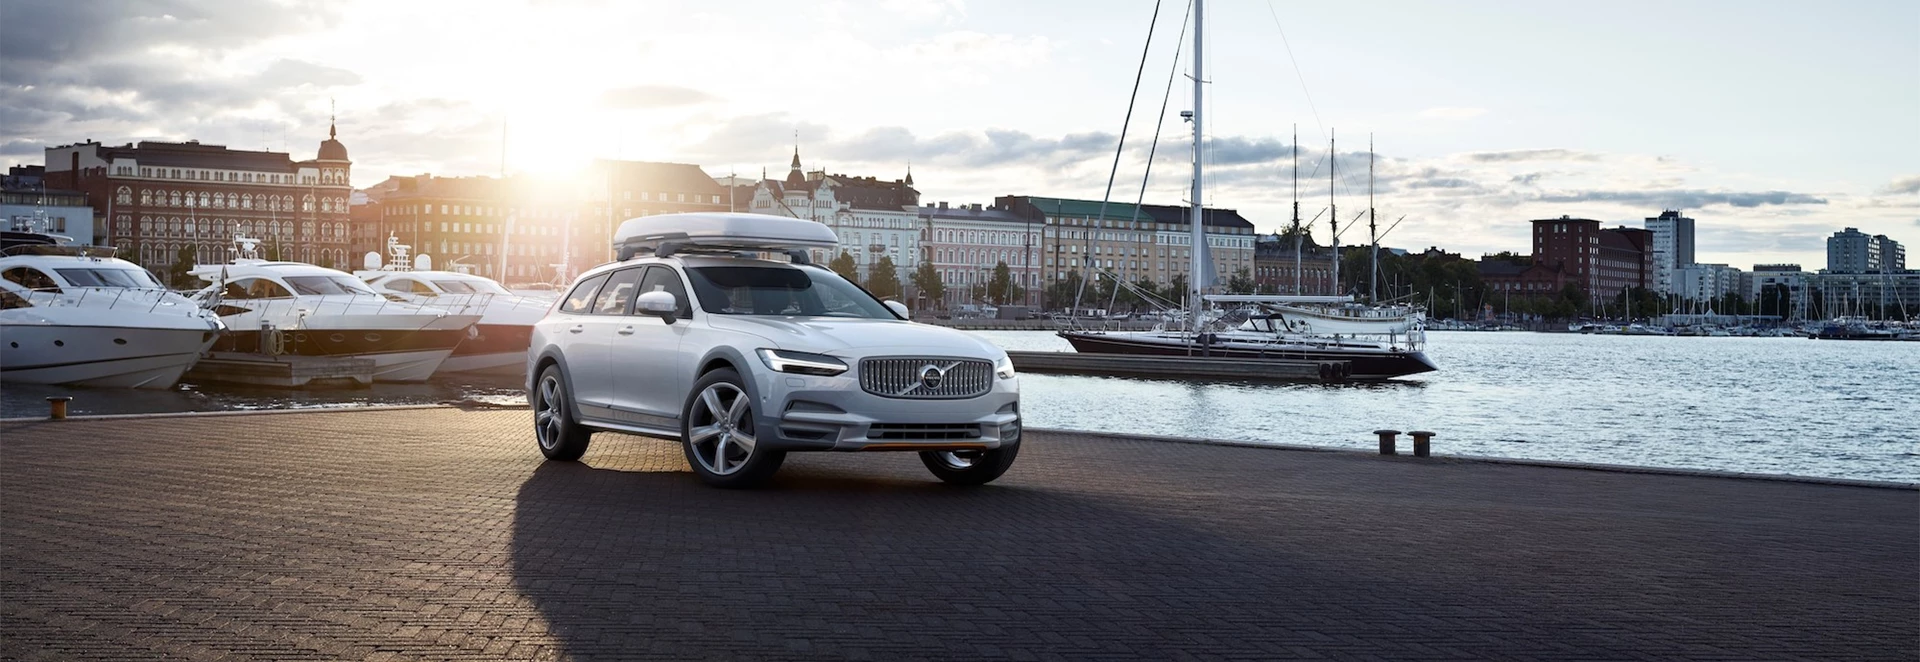 2018 Volvo V90 Cross Country Ocean Race Review 